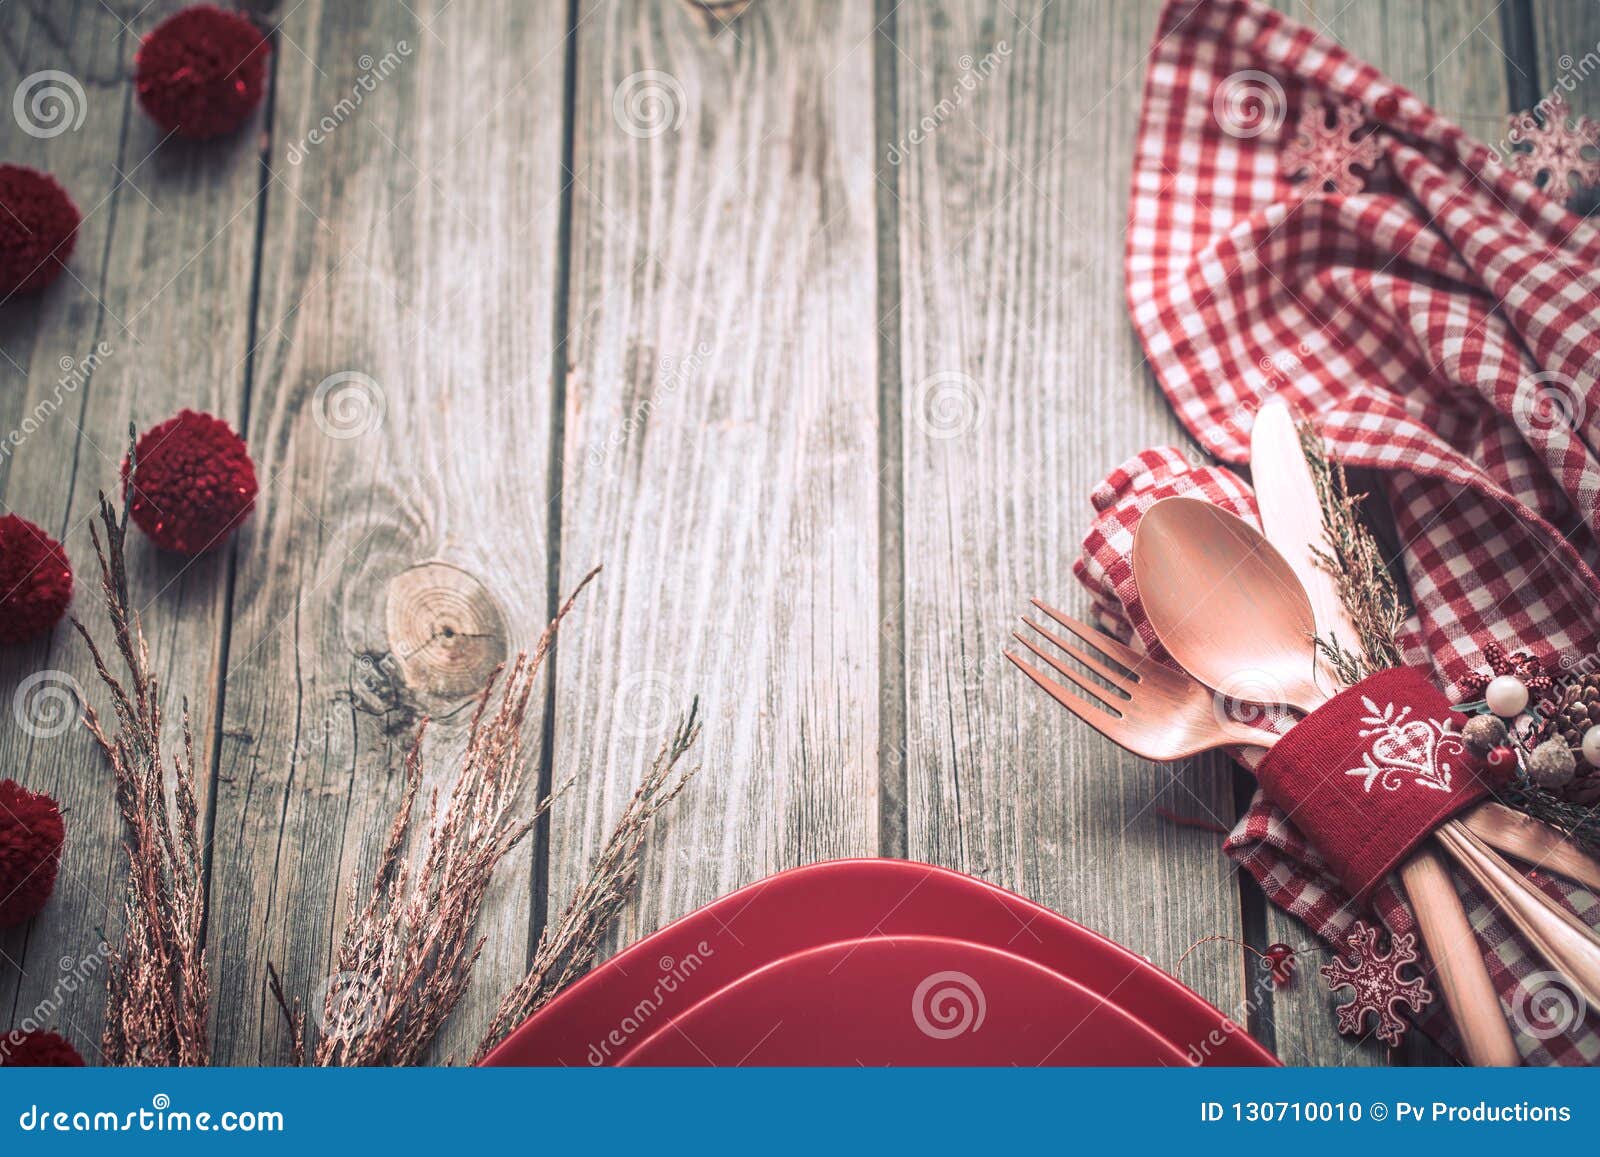 Christmas Dinner Cutlery with Decor on a Wooden Background Stock Photo ...